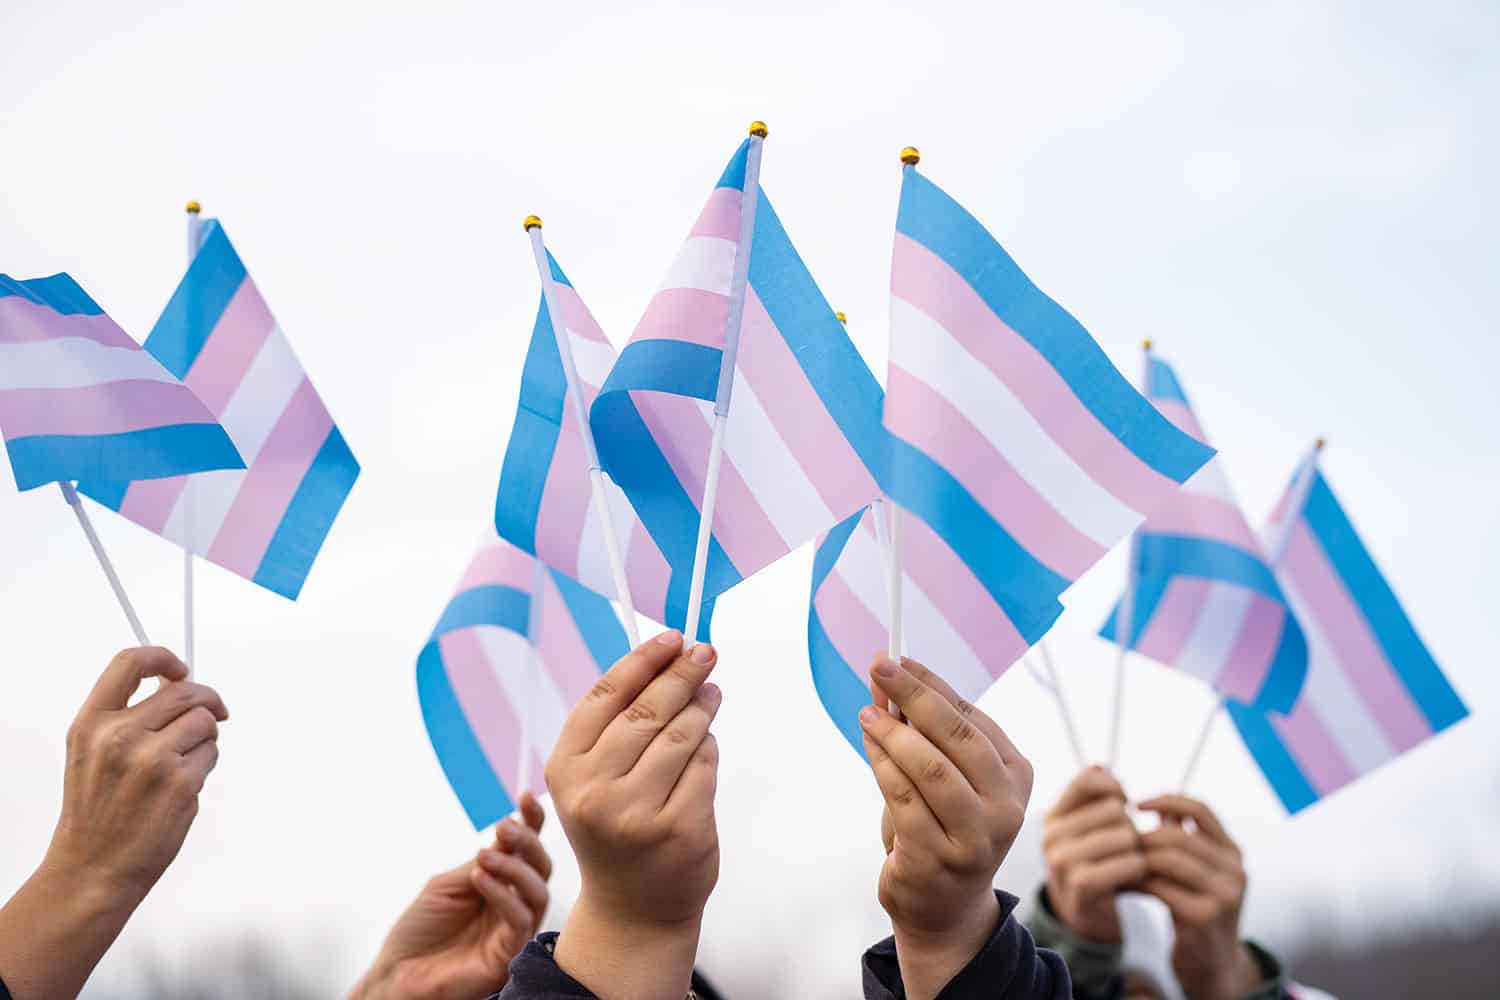 photo of hands holding transgender flags – in baby blue, baby pink and white stripes